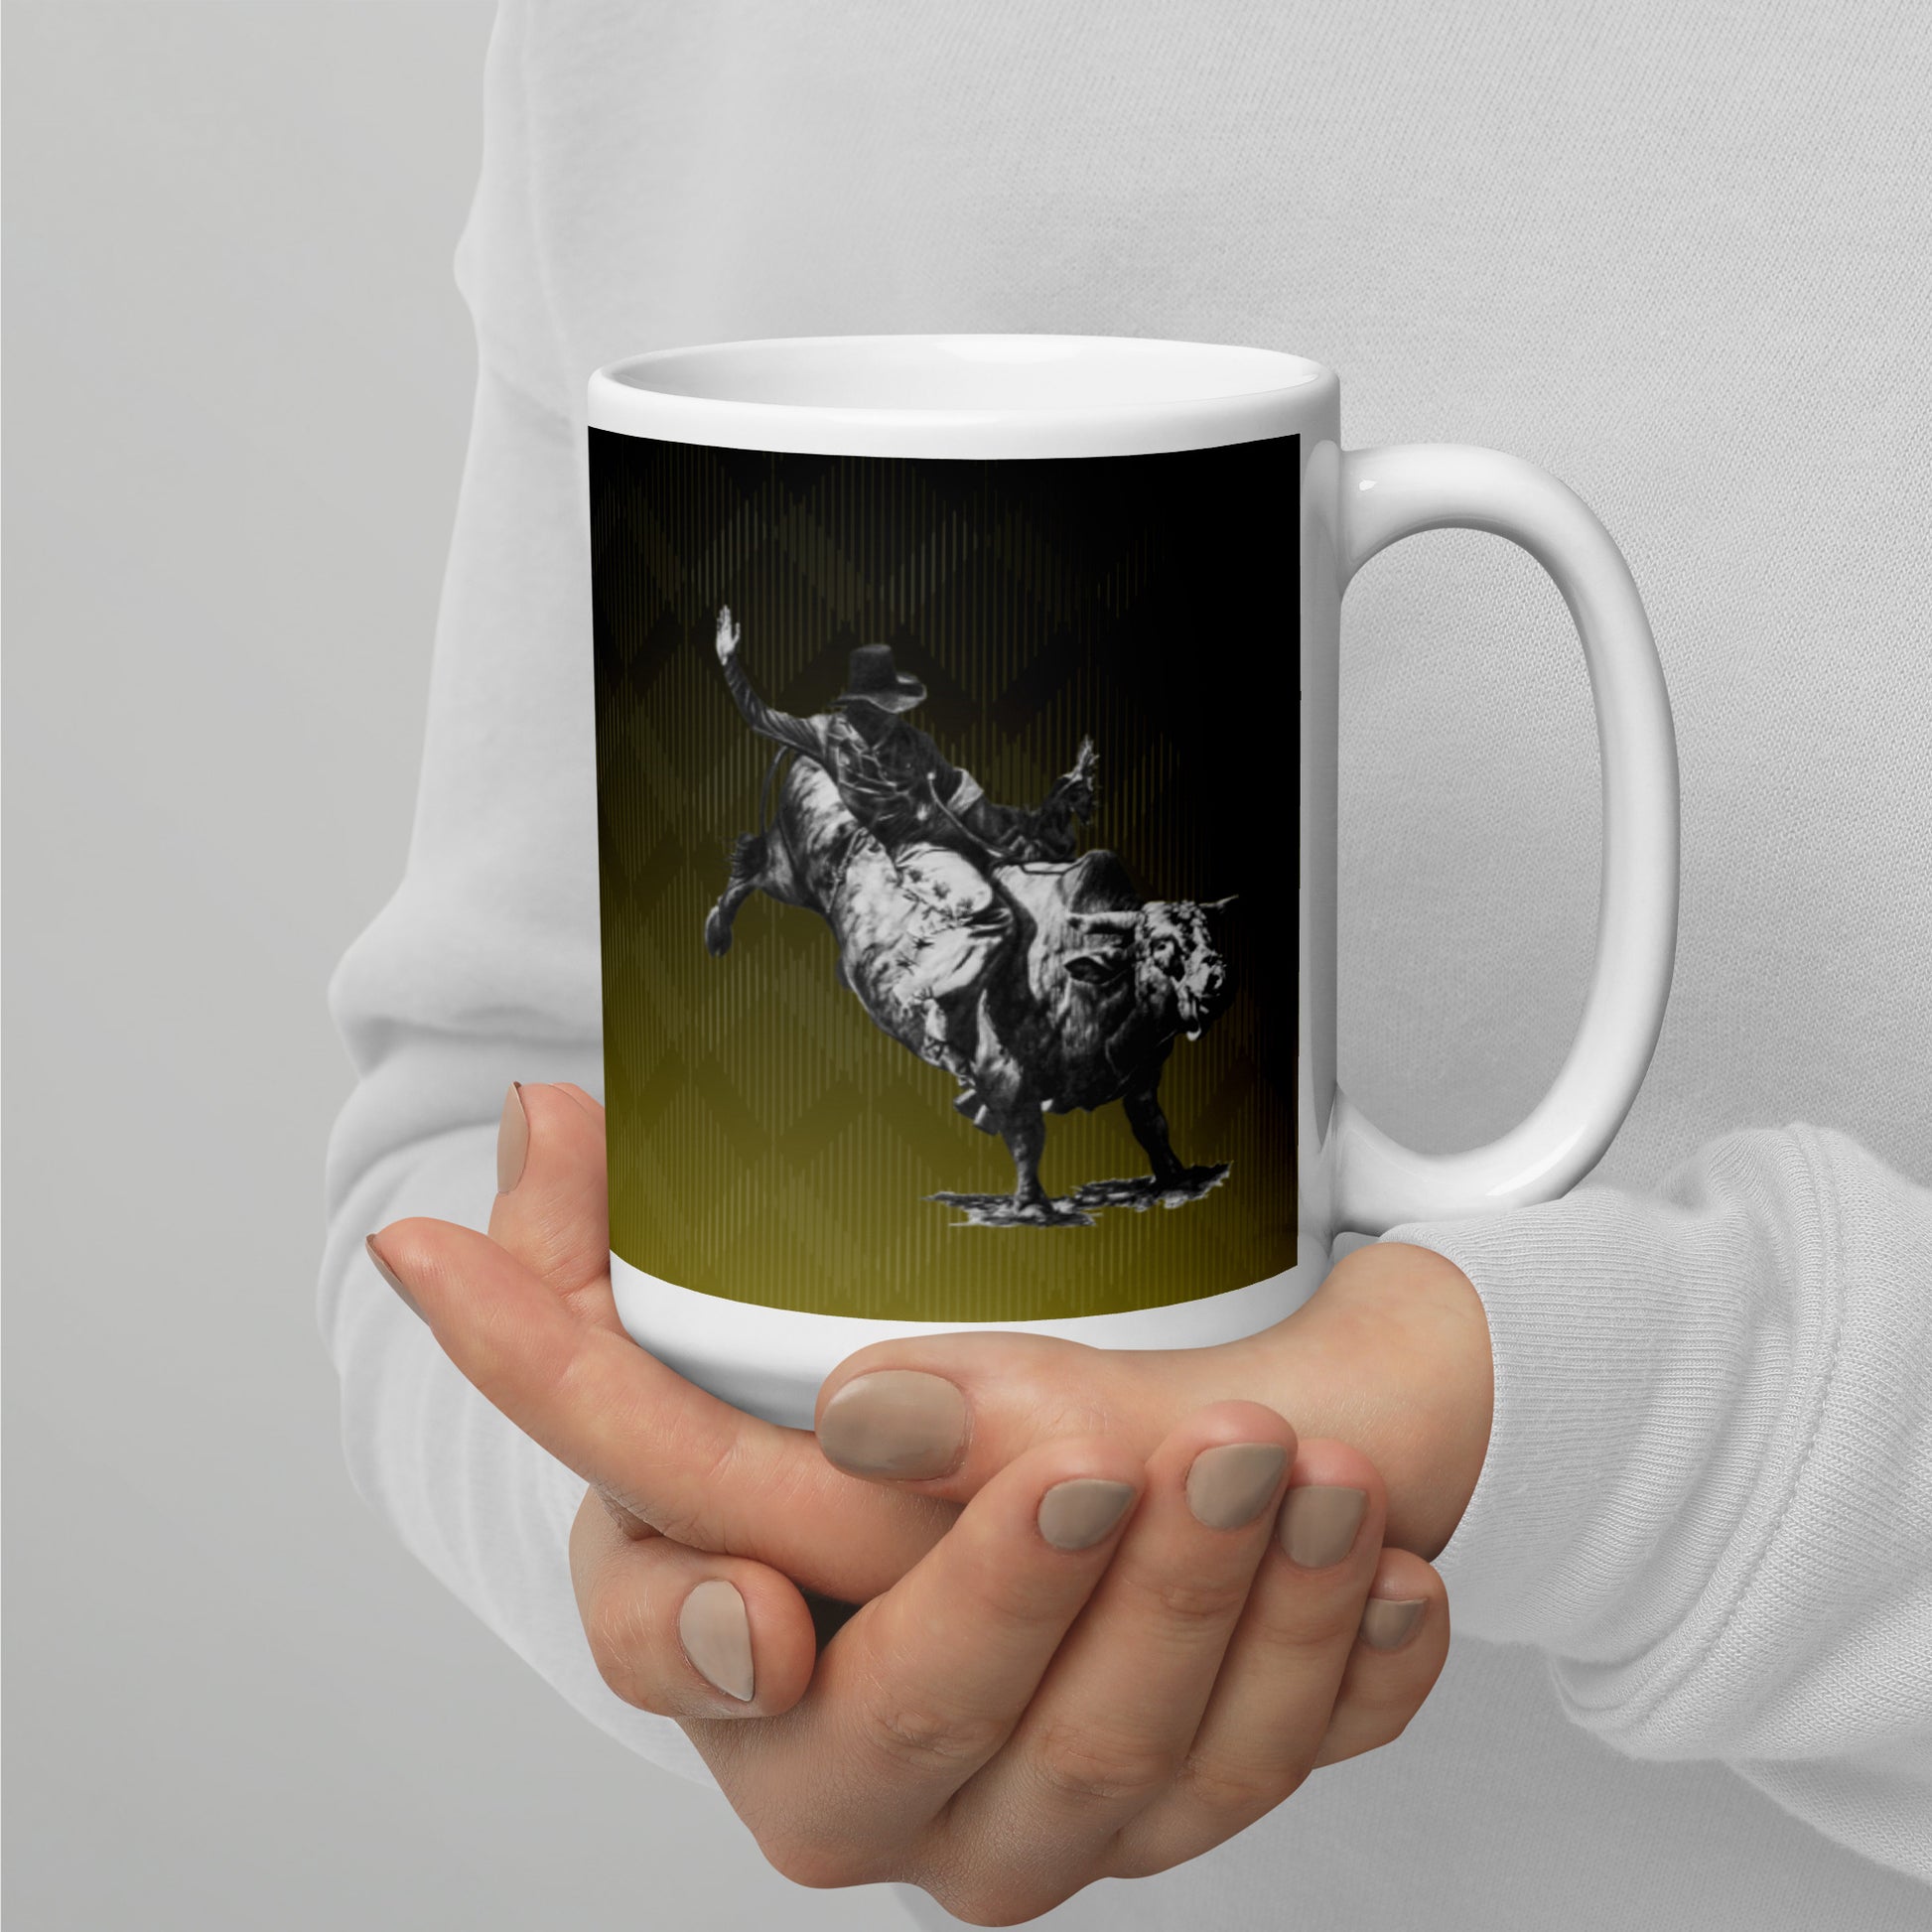 This "Bull Rider White Glossy Mug" is from a drawing of mine created with graphite pencil. It has been digitally optimized and transferred to a 15oz white glossy mug.